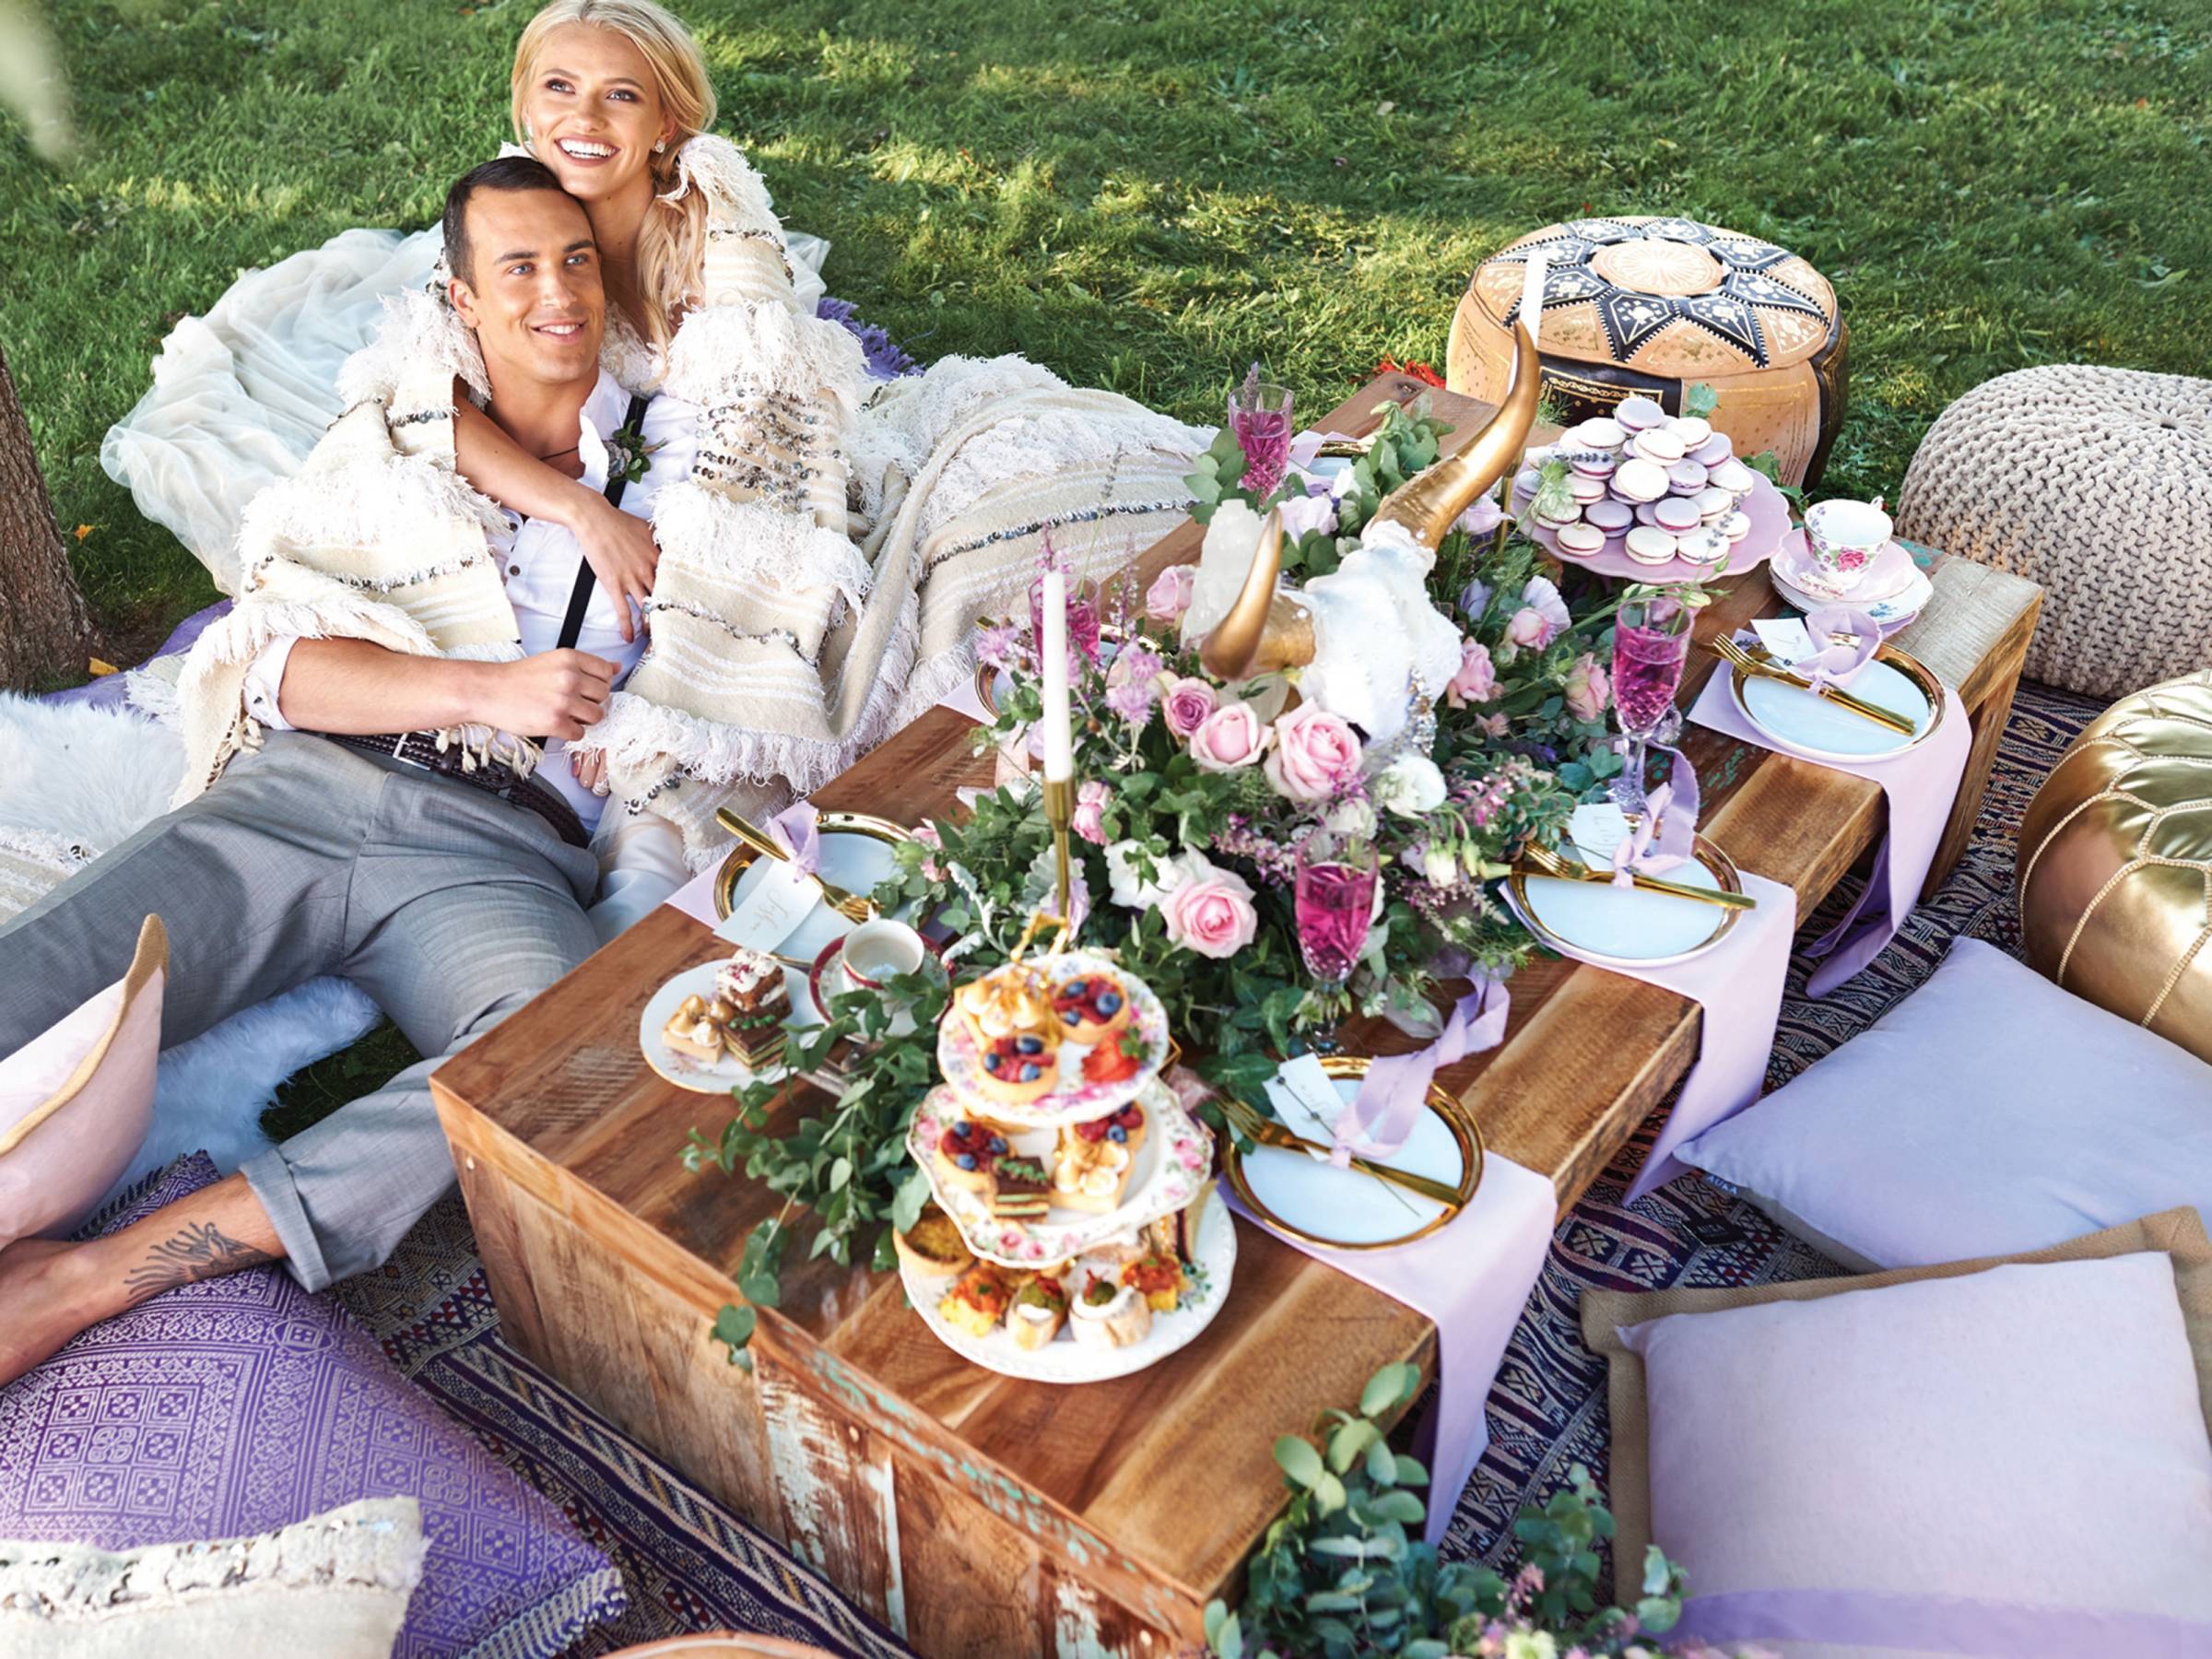 Bride and groom lounging by rustic wood table with pink and lavender florals, desserts and china